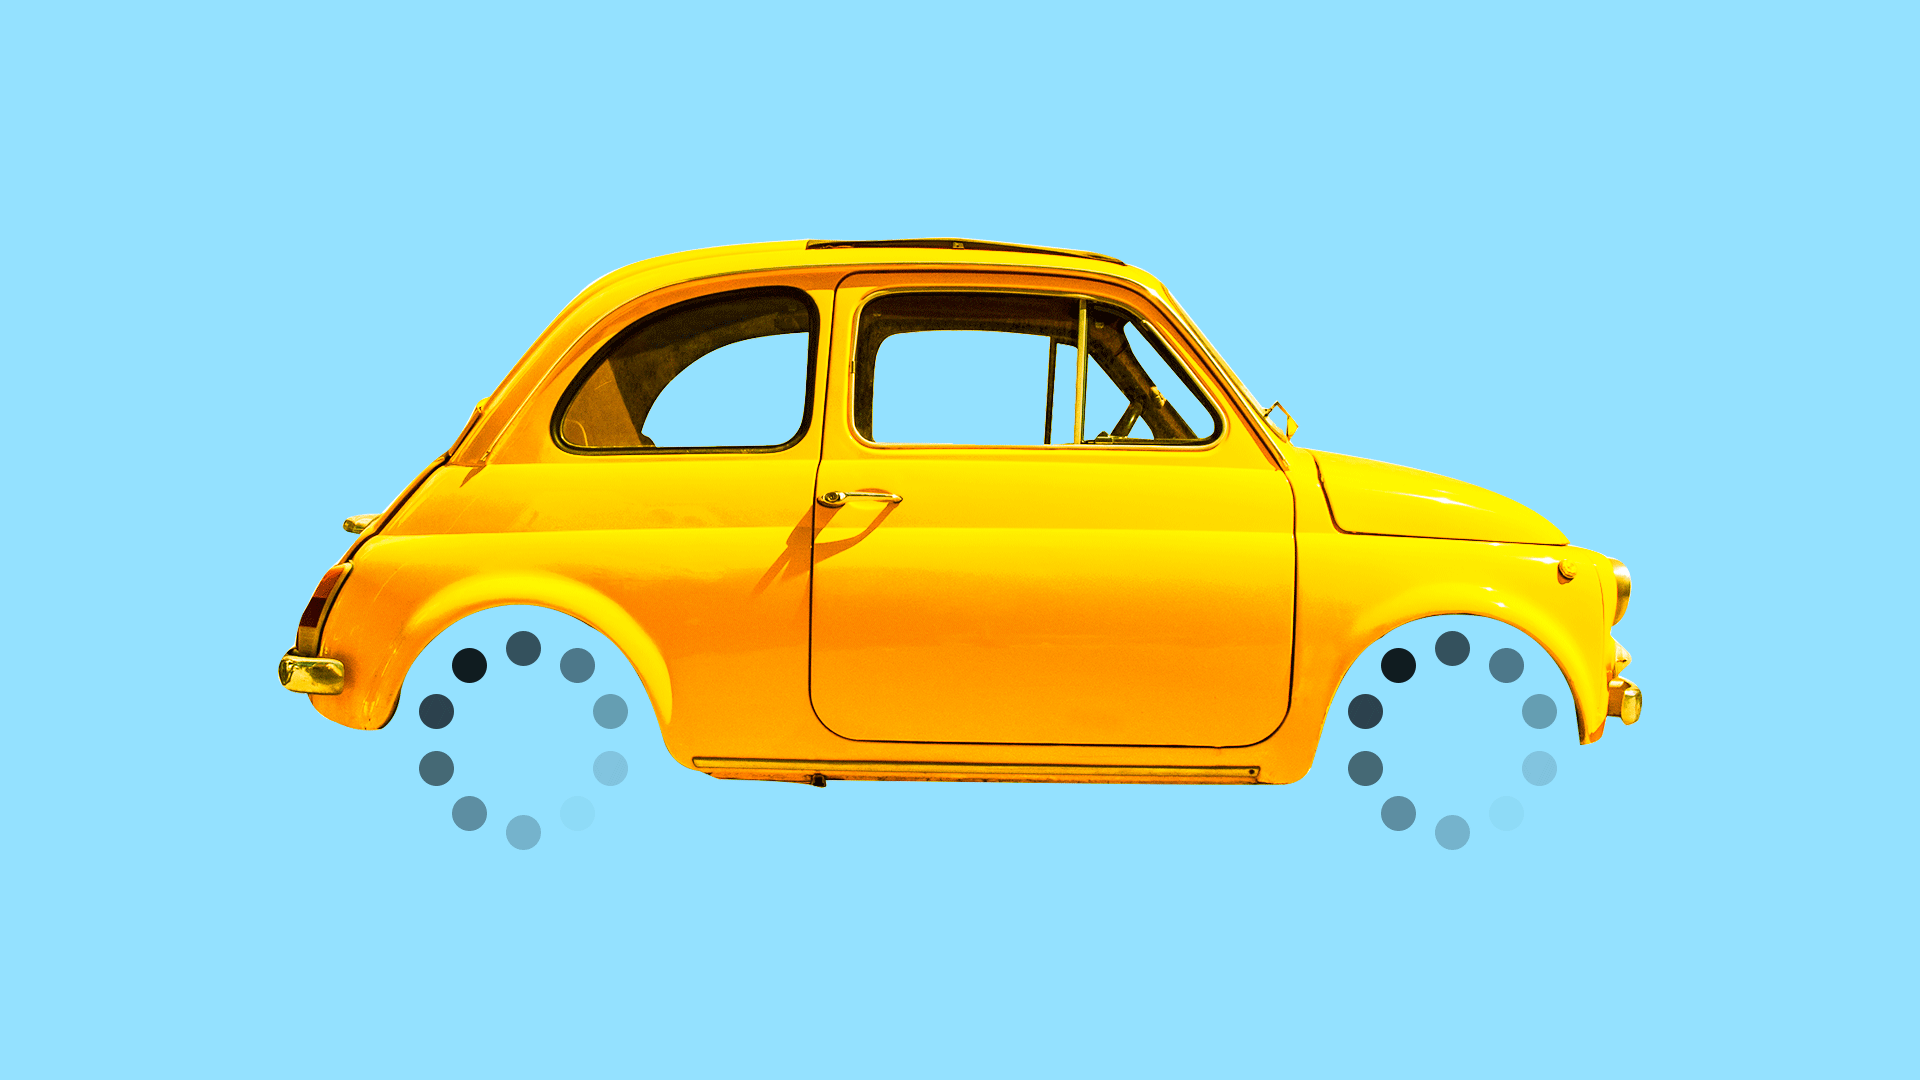 Illustration of a car with loading symbols instead of wheels 